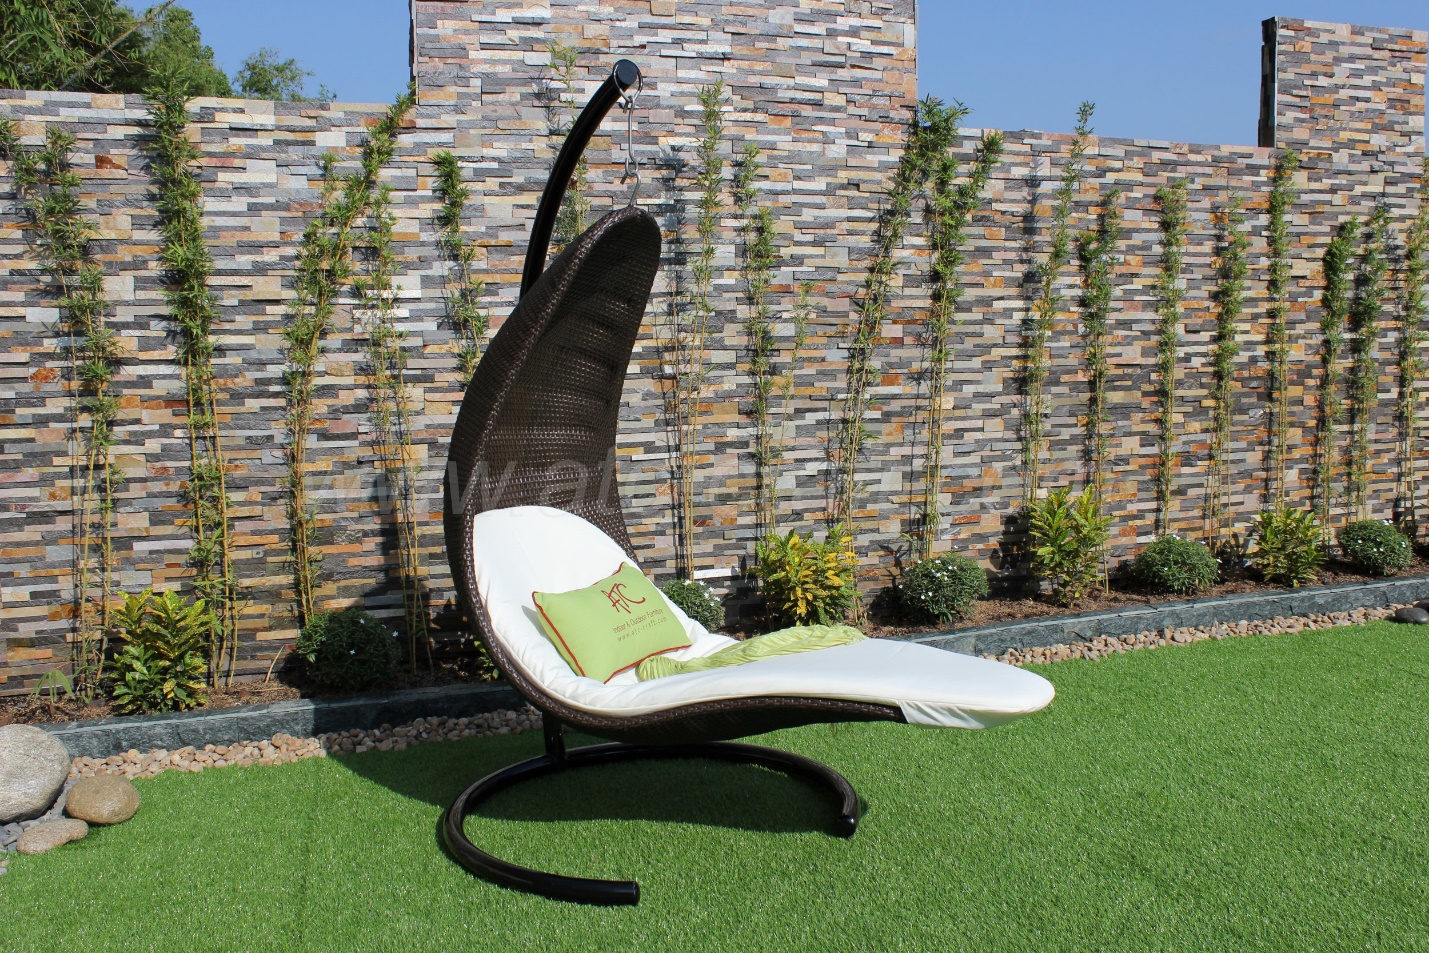 A wicker hanging sun lounger - by ATC Furniture